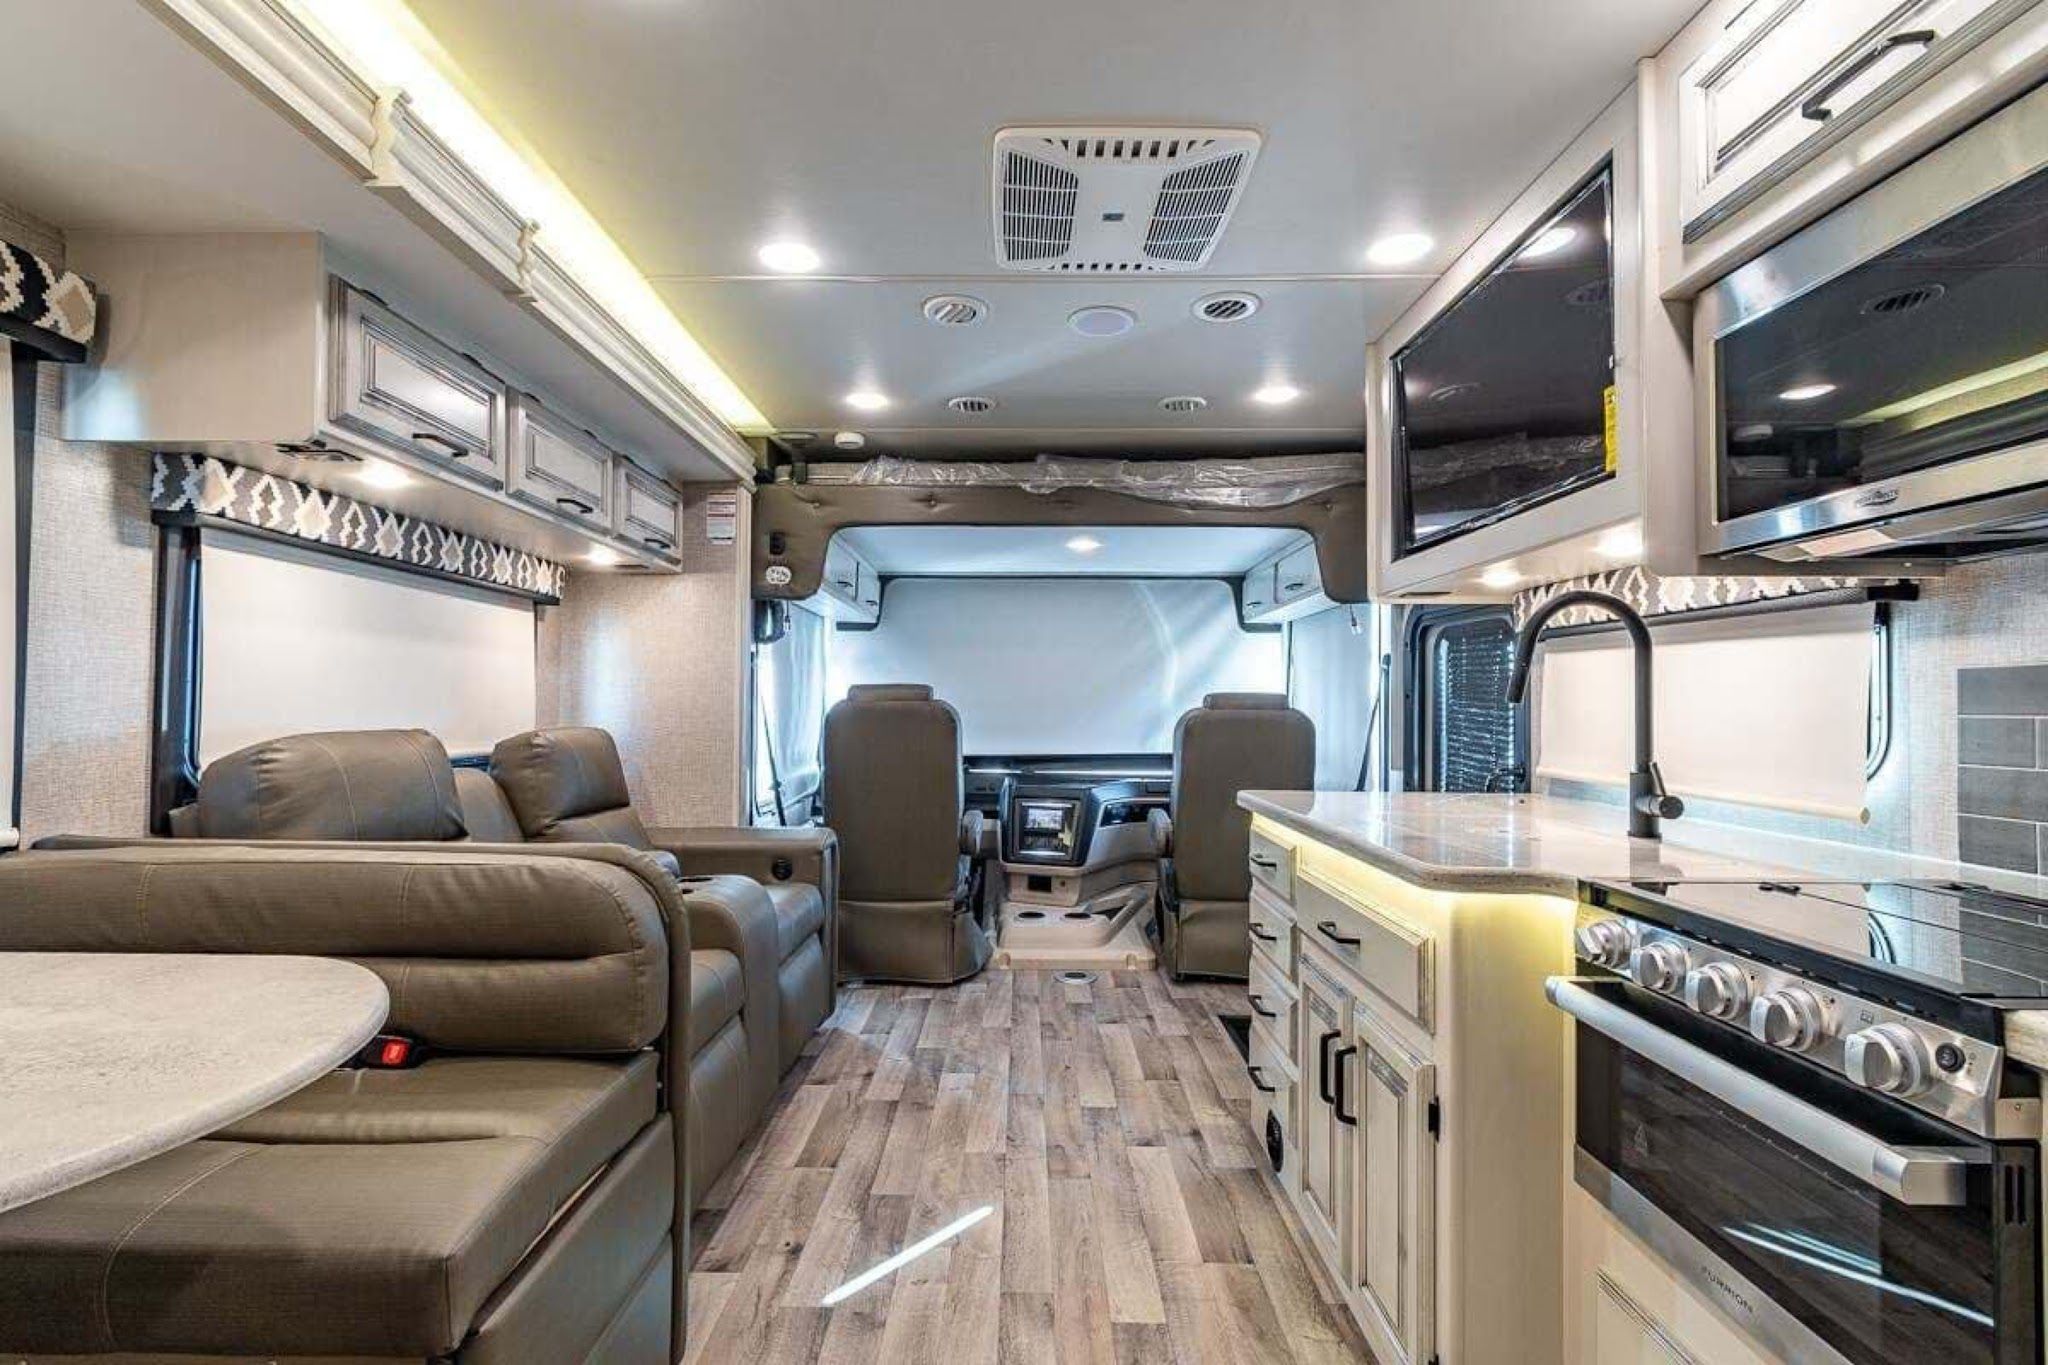 Services & Products B&W RV rentals in Chantilly VA